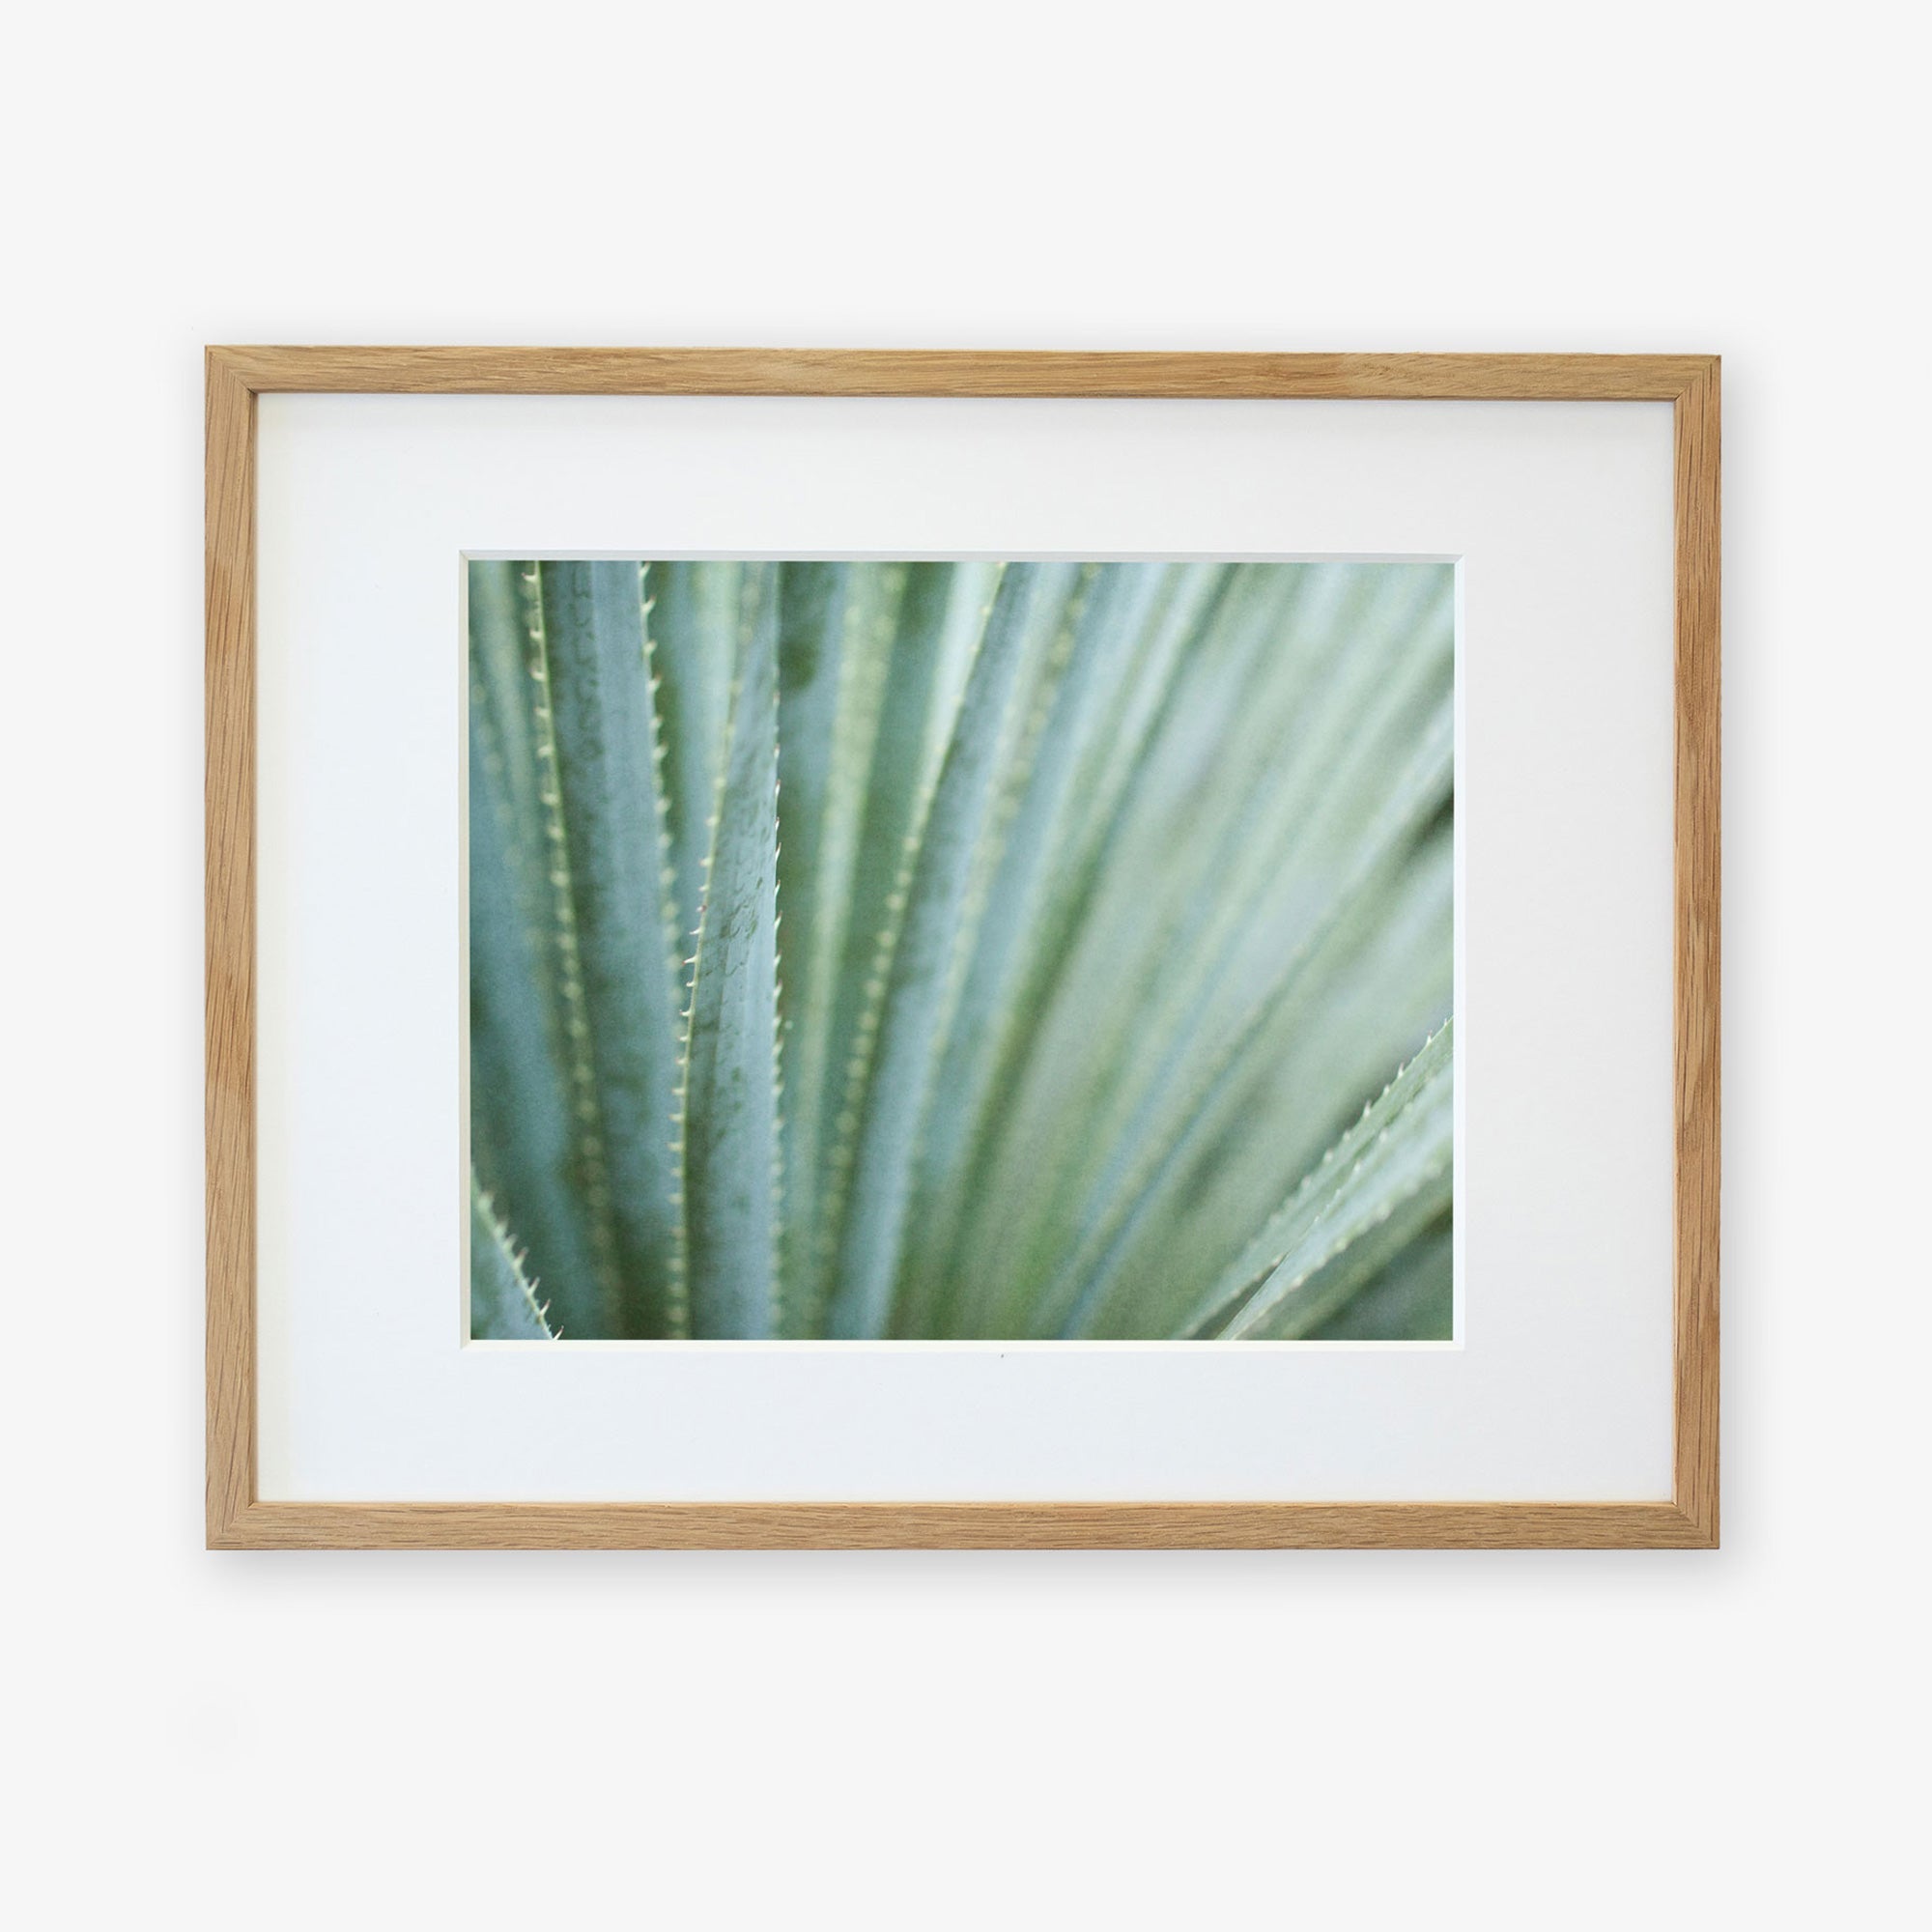 A framed photograph of close-up green agave plant leaves with sharp edges and pointed tips, displayed against a white background. The wooden frame is simple and light-colored. This desert plants photography is printed on Offley Green&#39;s Abstract Green Botanical Print, &#39;Strands and Spikes&#39;.